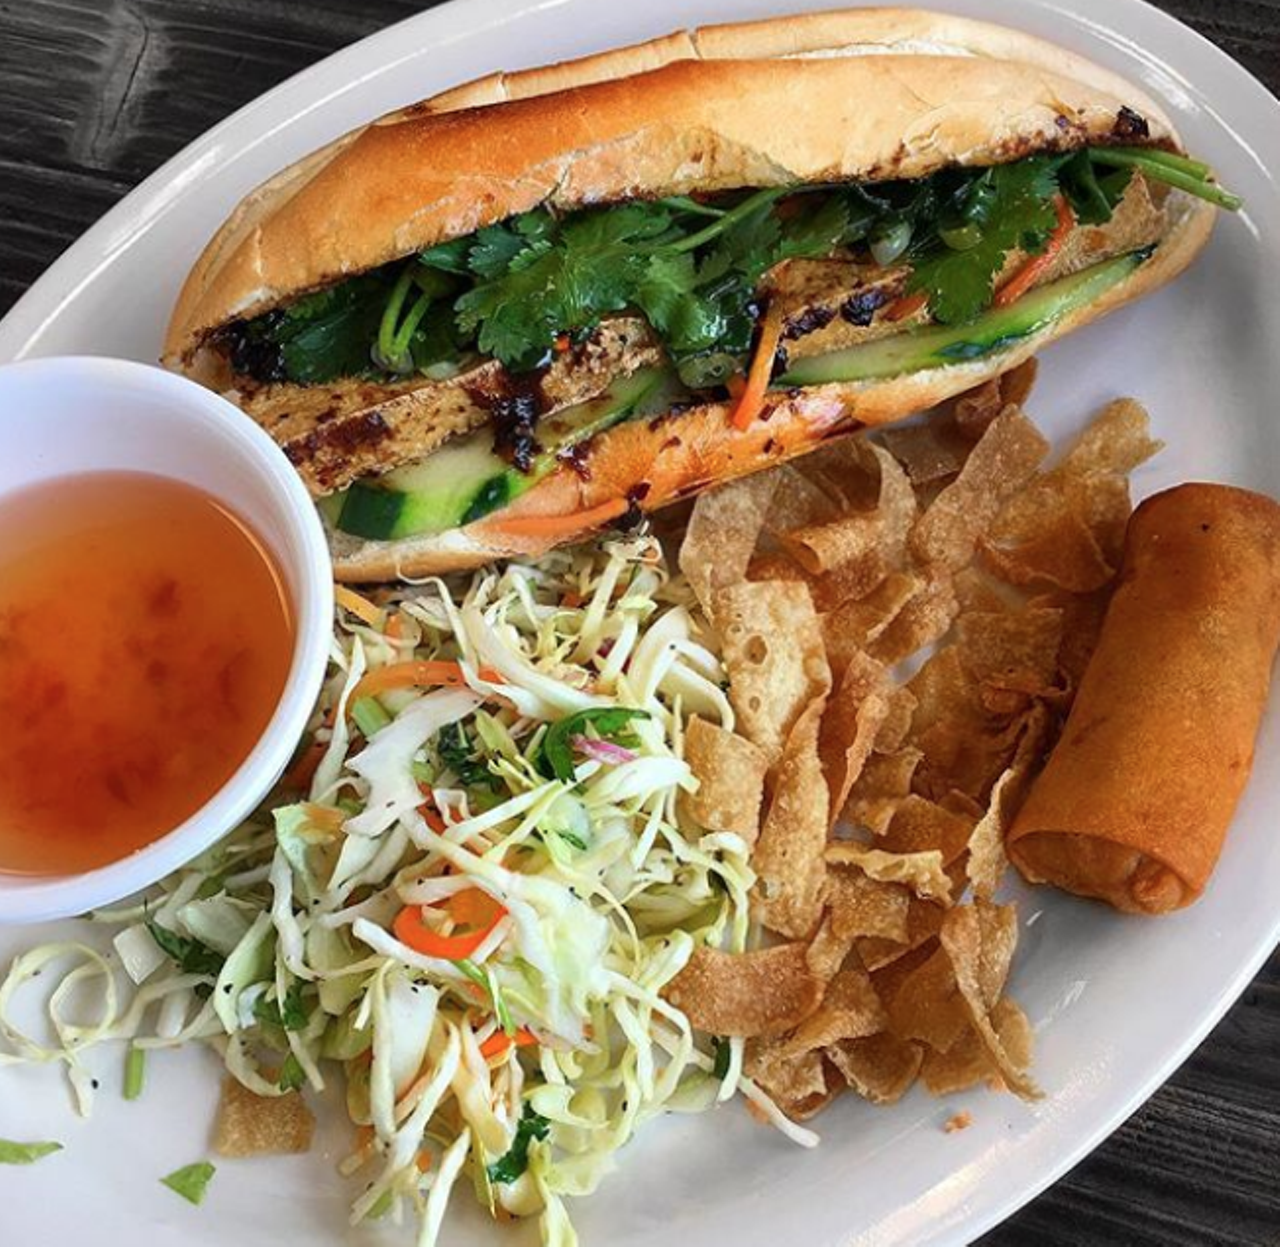 Berni Vietnamese
8742 Wurzbach Road, (210) 485-5982, facebook.com
Service is speedy, and servings are generous at this spotless Vietnamese joint off Wurzbach that ends your meal with a warm bowl of taro tapioca.
Photo via Instagram / ja.foodies